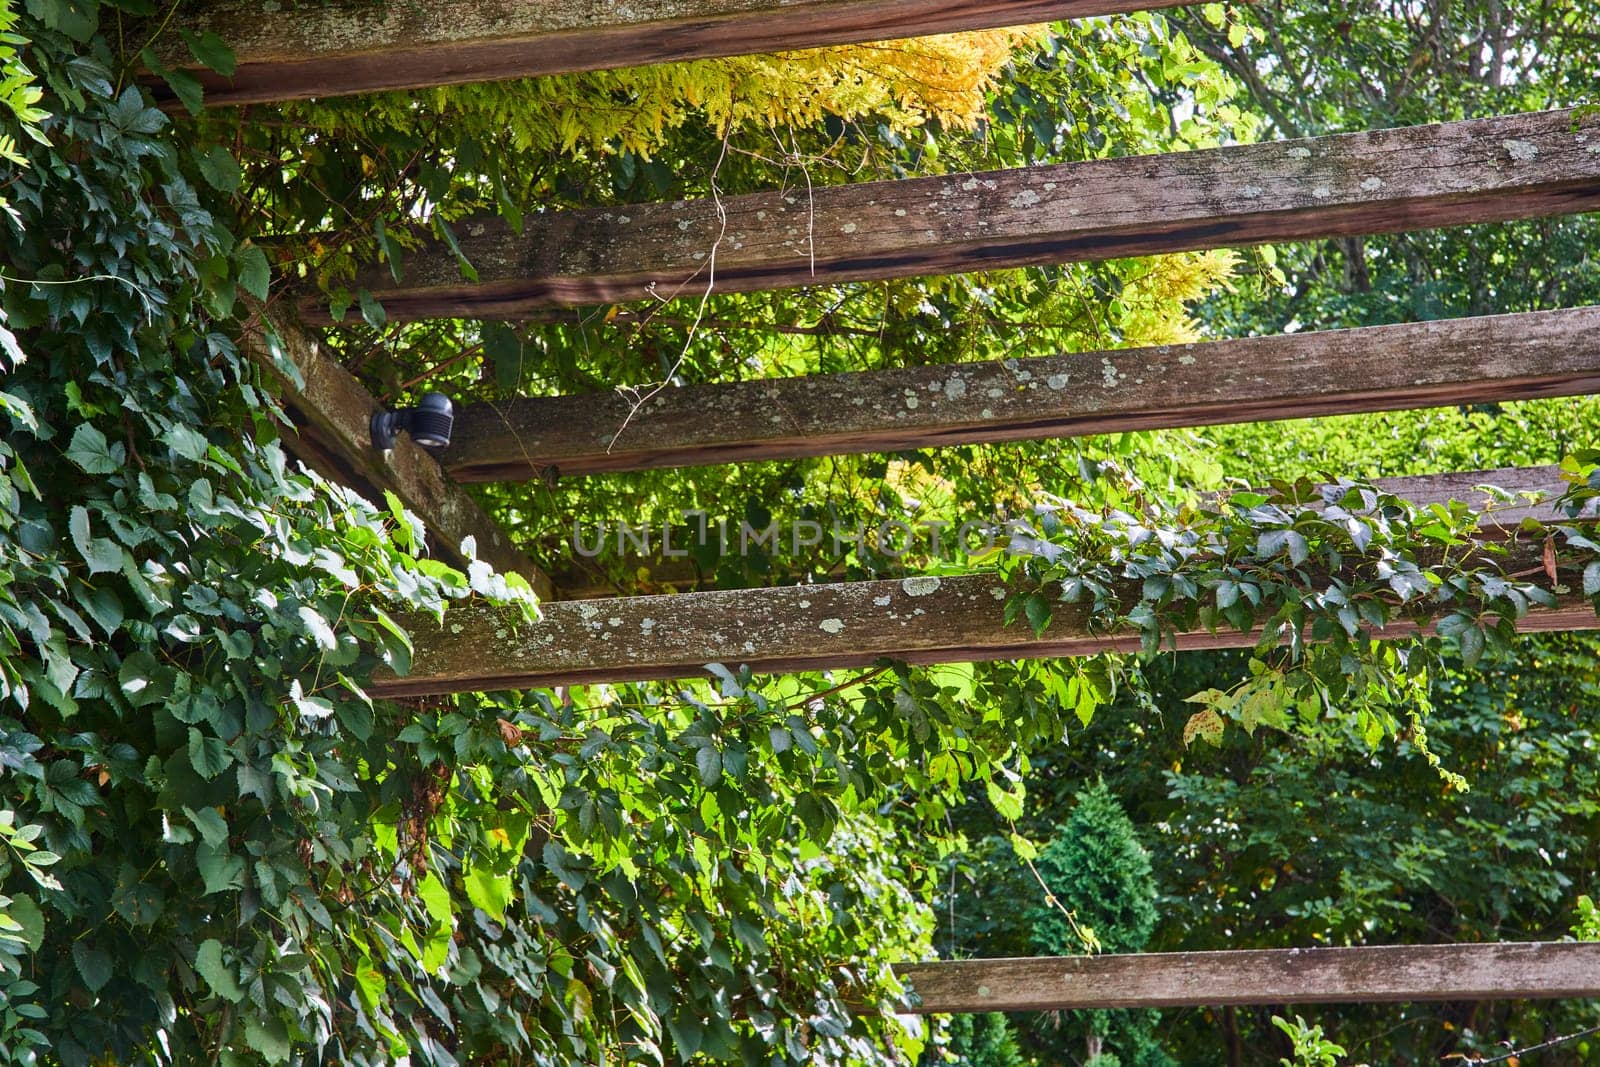 Sunlit rustic pergola intertwined with lush greenery at an art center in Indianapolis, Indiana, embodying tranquil outdoor living and eco-friendly harmony.